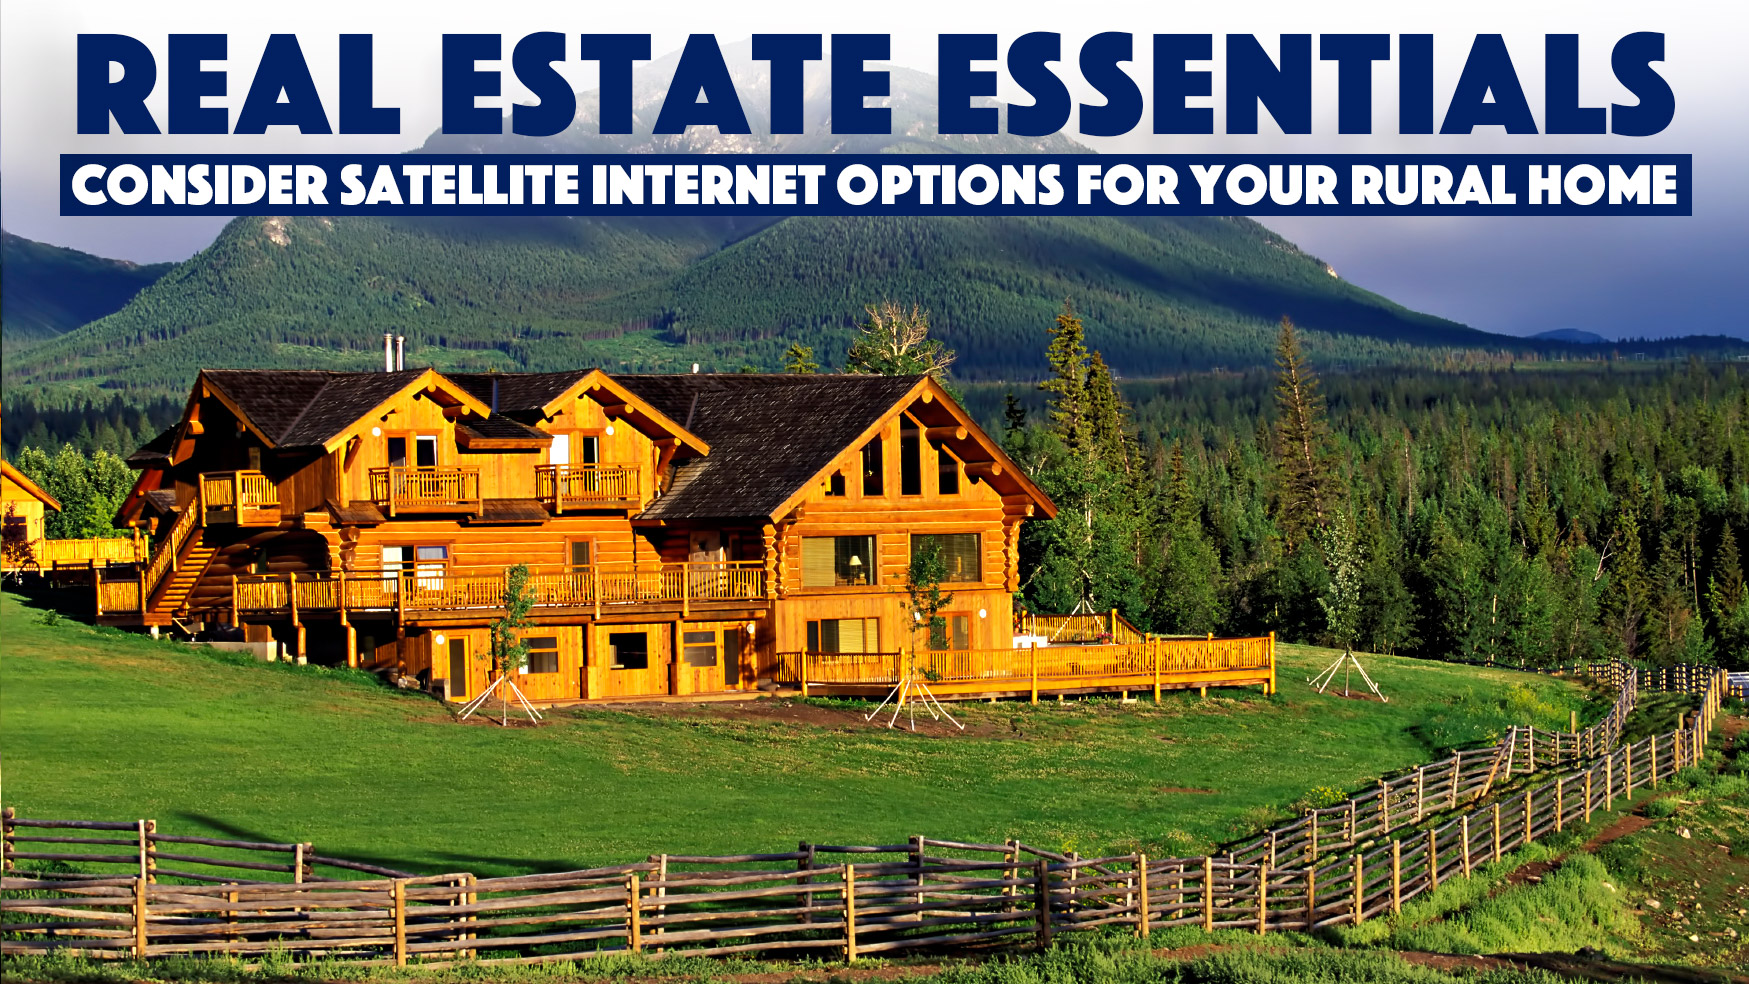 Real Estate Essentials - Consider Satellite Internet Options For Your Rural Home